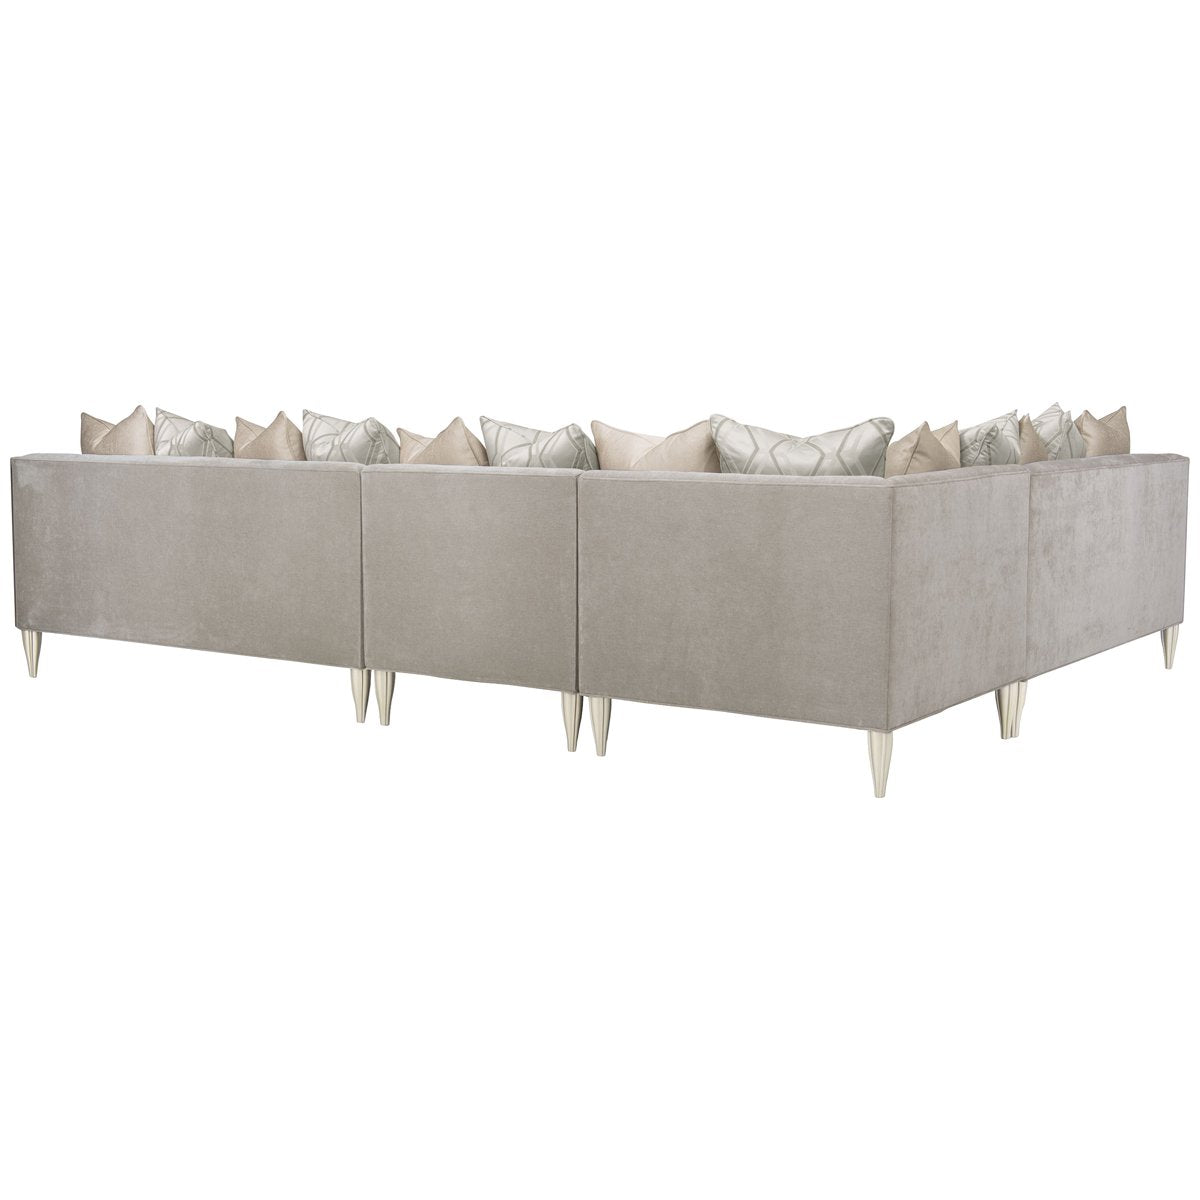 Caracole Upholstery Fret Knot Sectional